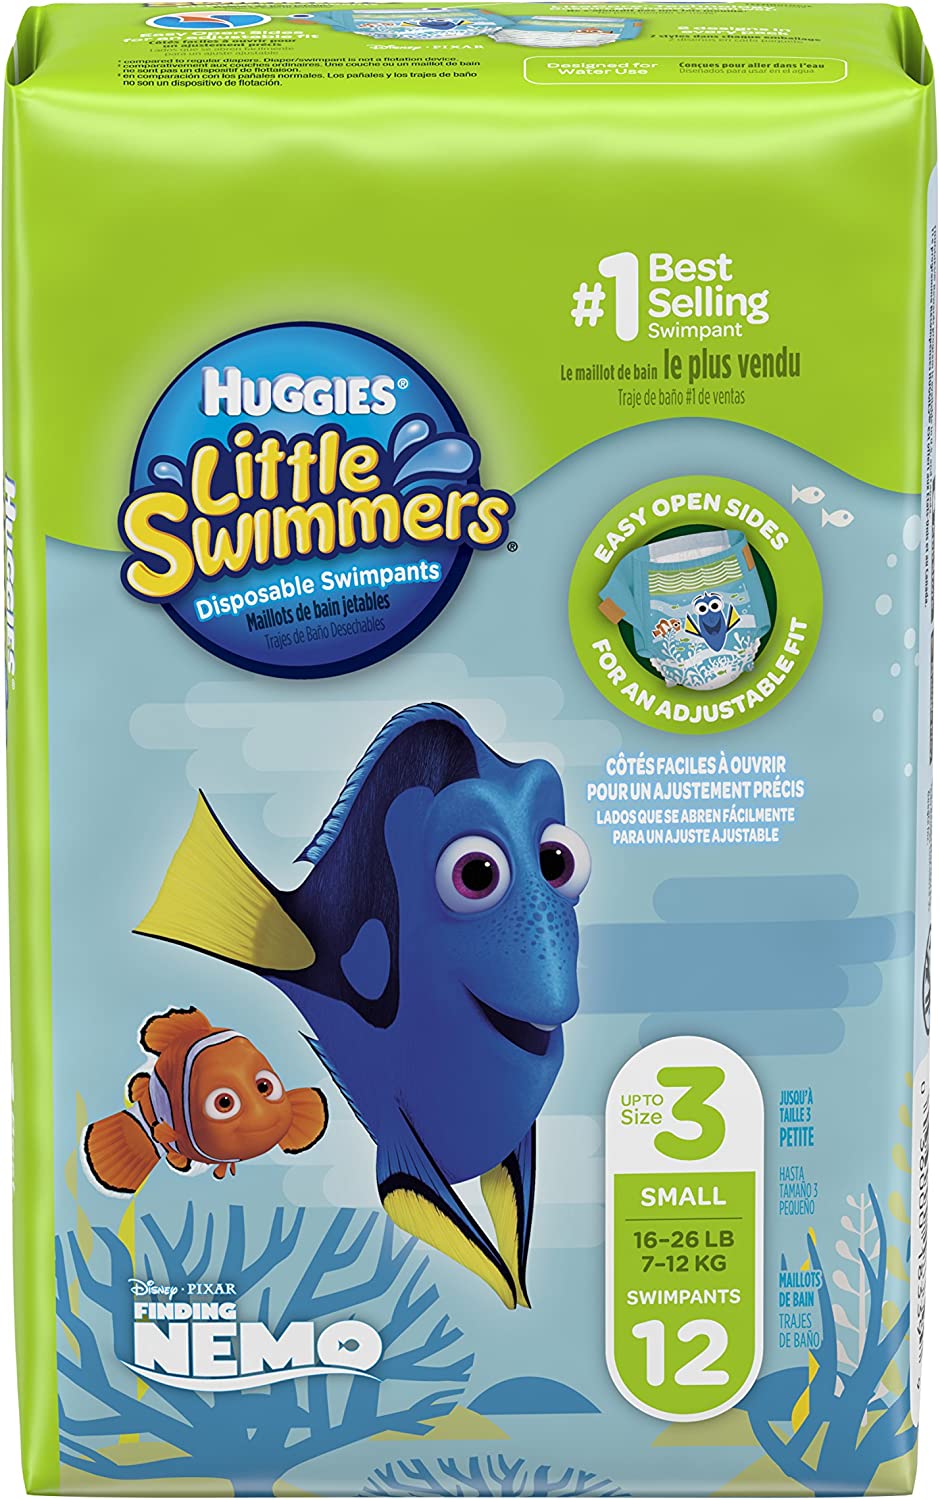 HUGGIES Little Swimmers Disposable Swim Diapers, Size 3 Small, 12 Count